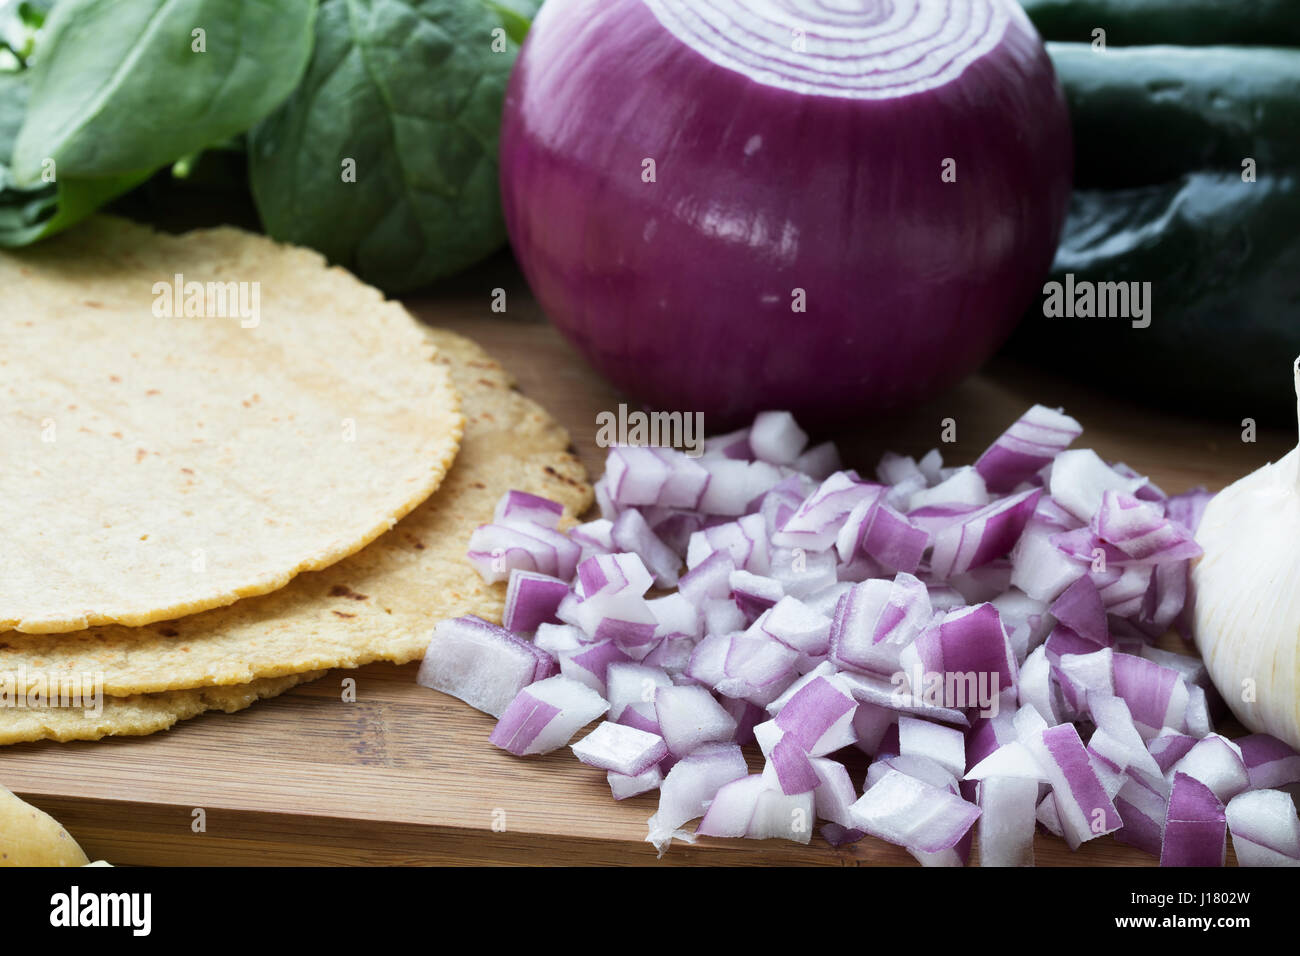 Chopped red onions with corn tortillas and other ingredients. Stock Photo